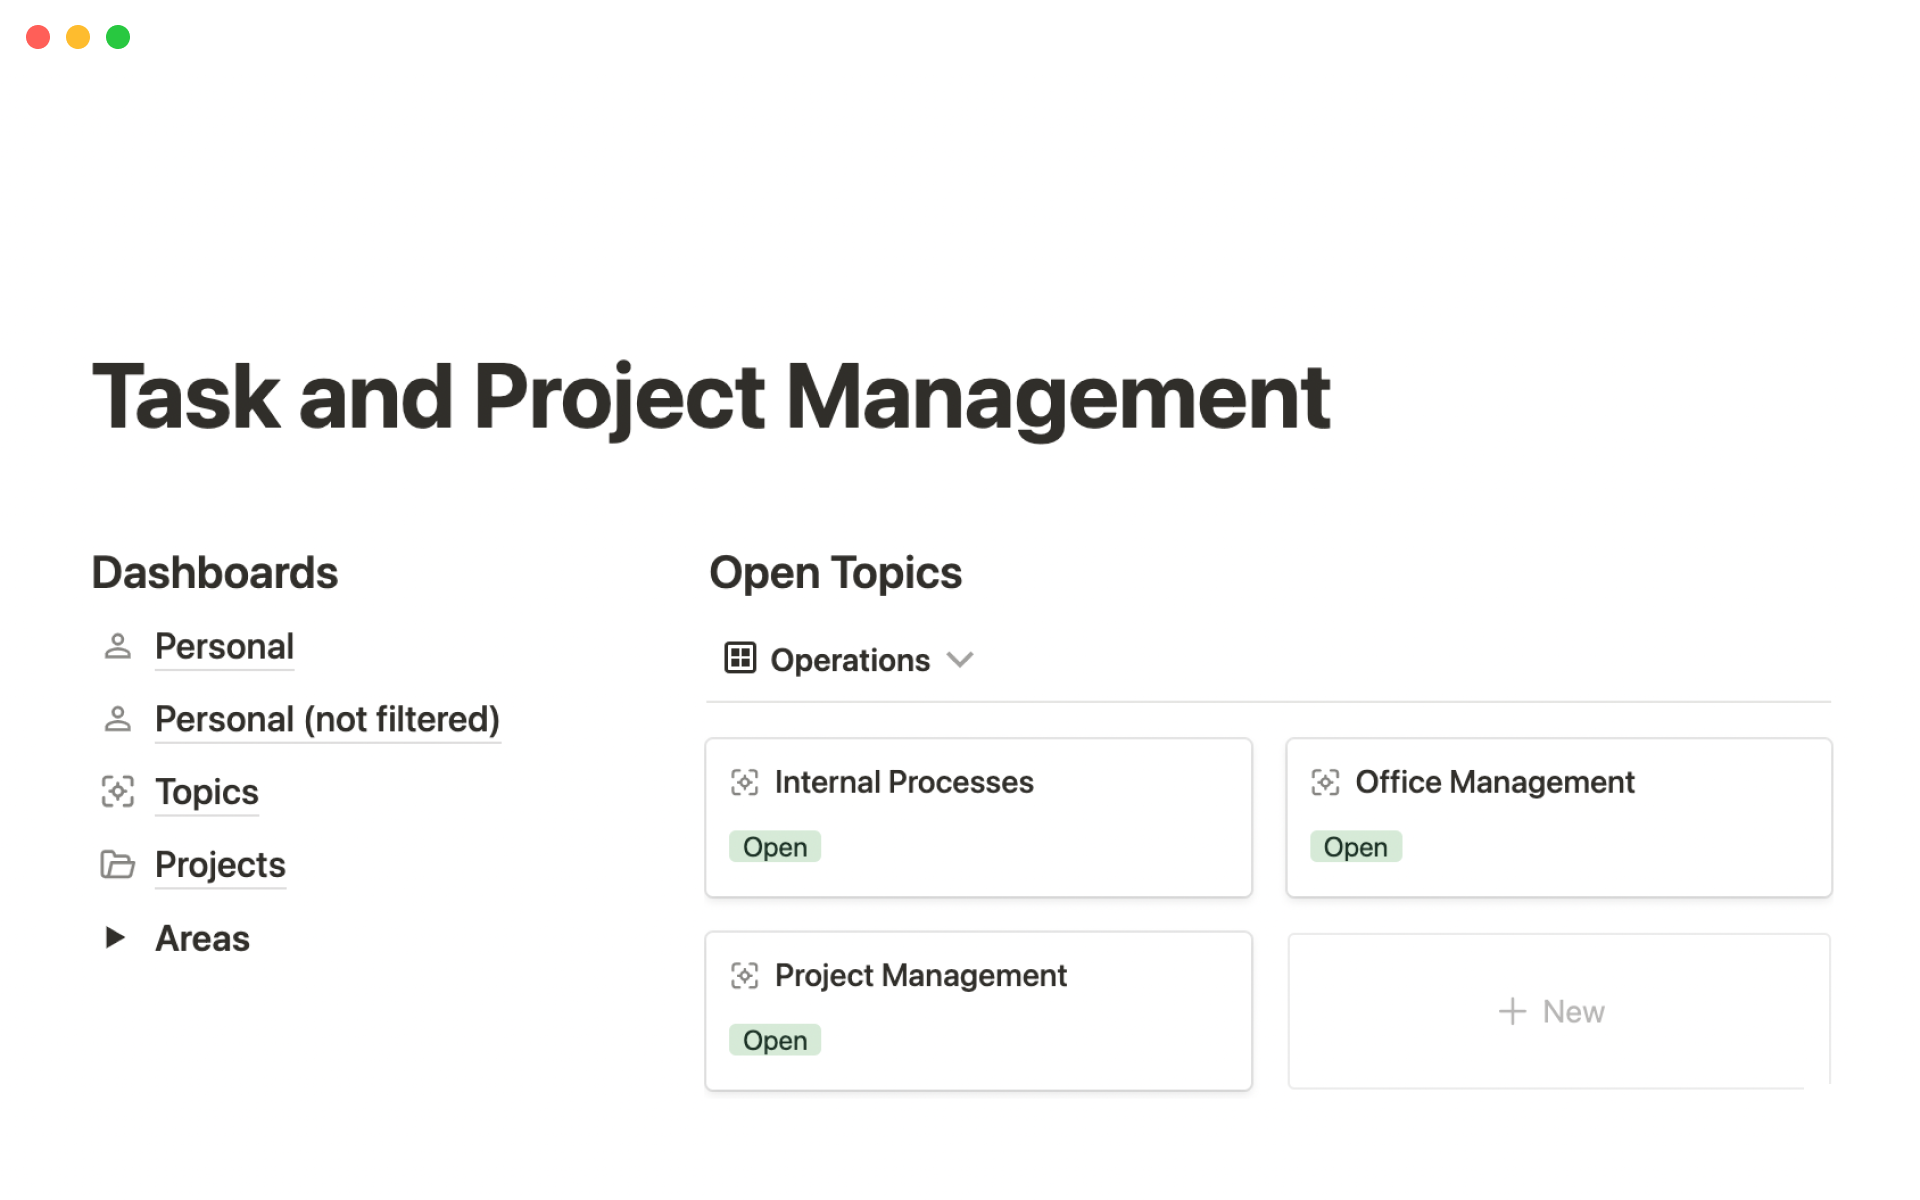 Manage all your projects and tasks in the most organized and efficient way possible.